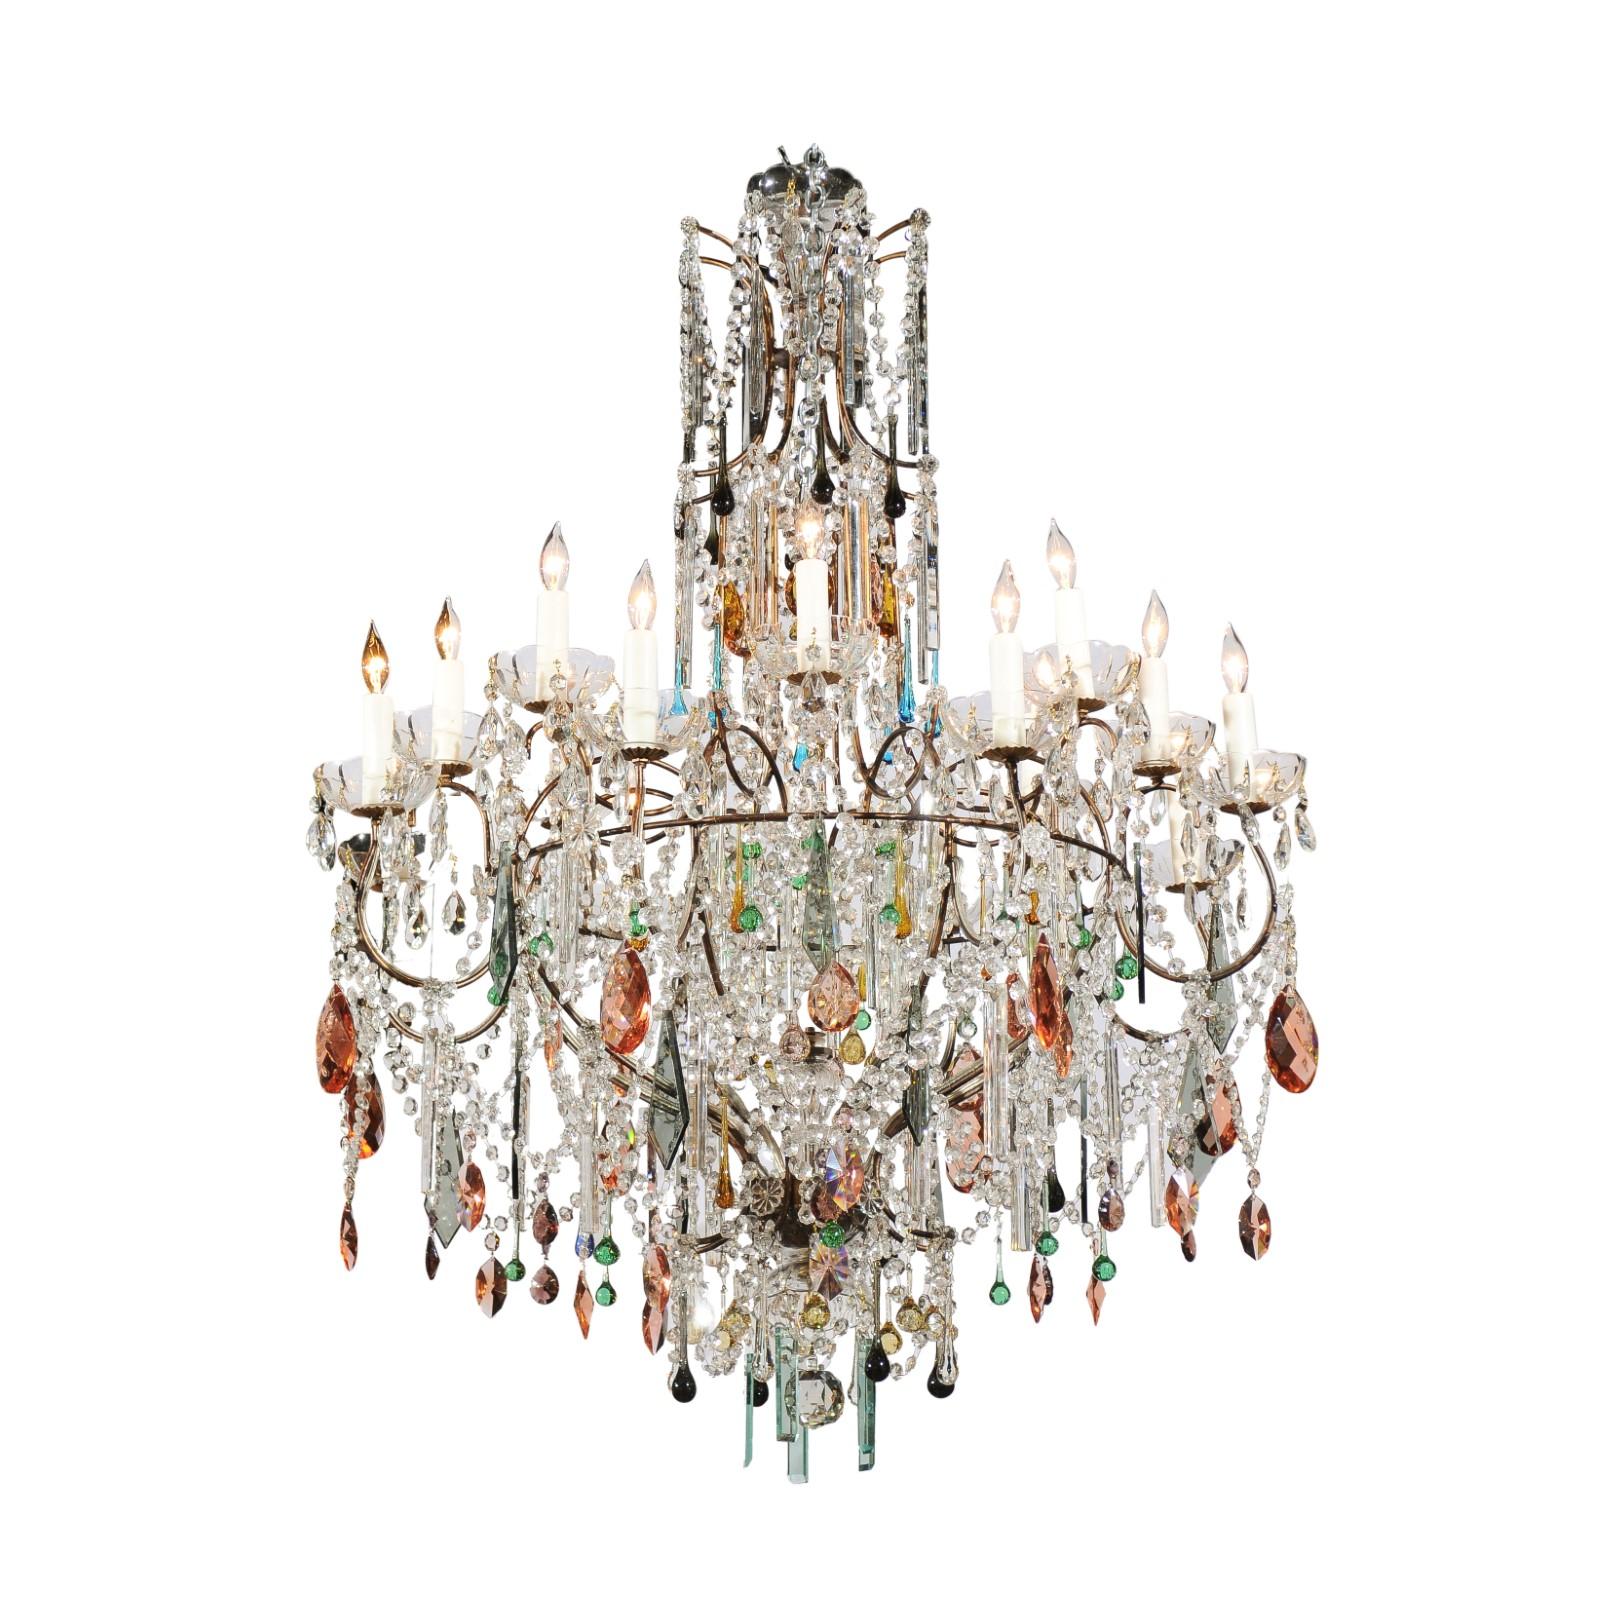 Vintage Florentine Midcentury 16-Light Chandelier Draped with Colorful Crystals